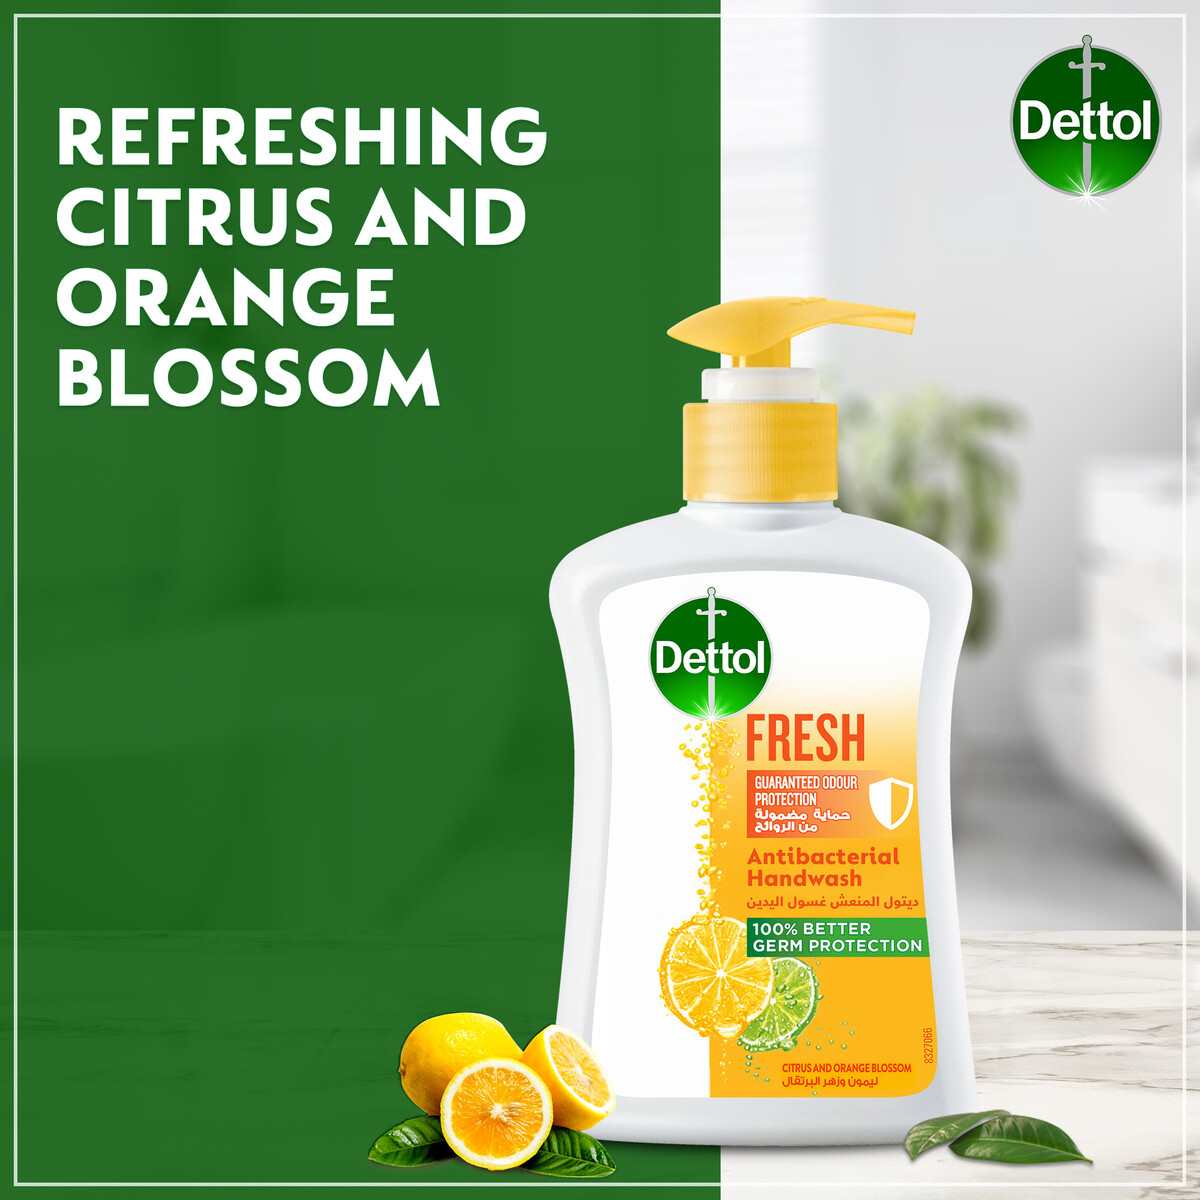 Dettol Anti-Bacterial Hand Wash Fresh Value Pack 2 x 400 ml